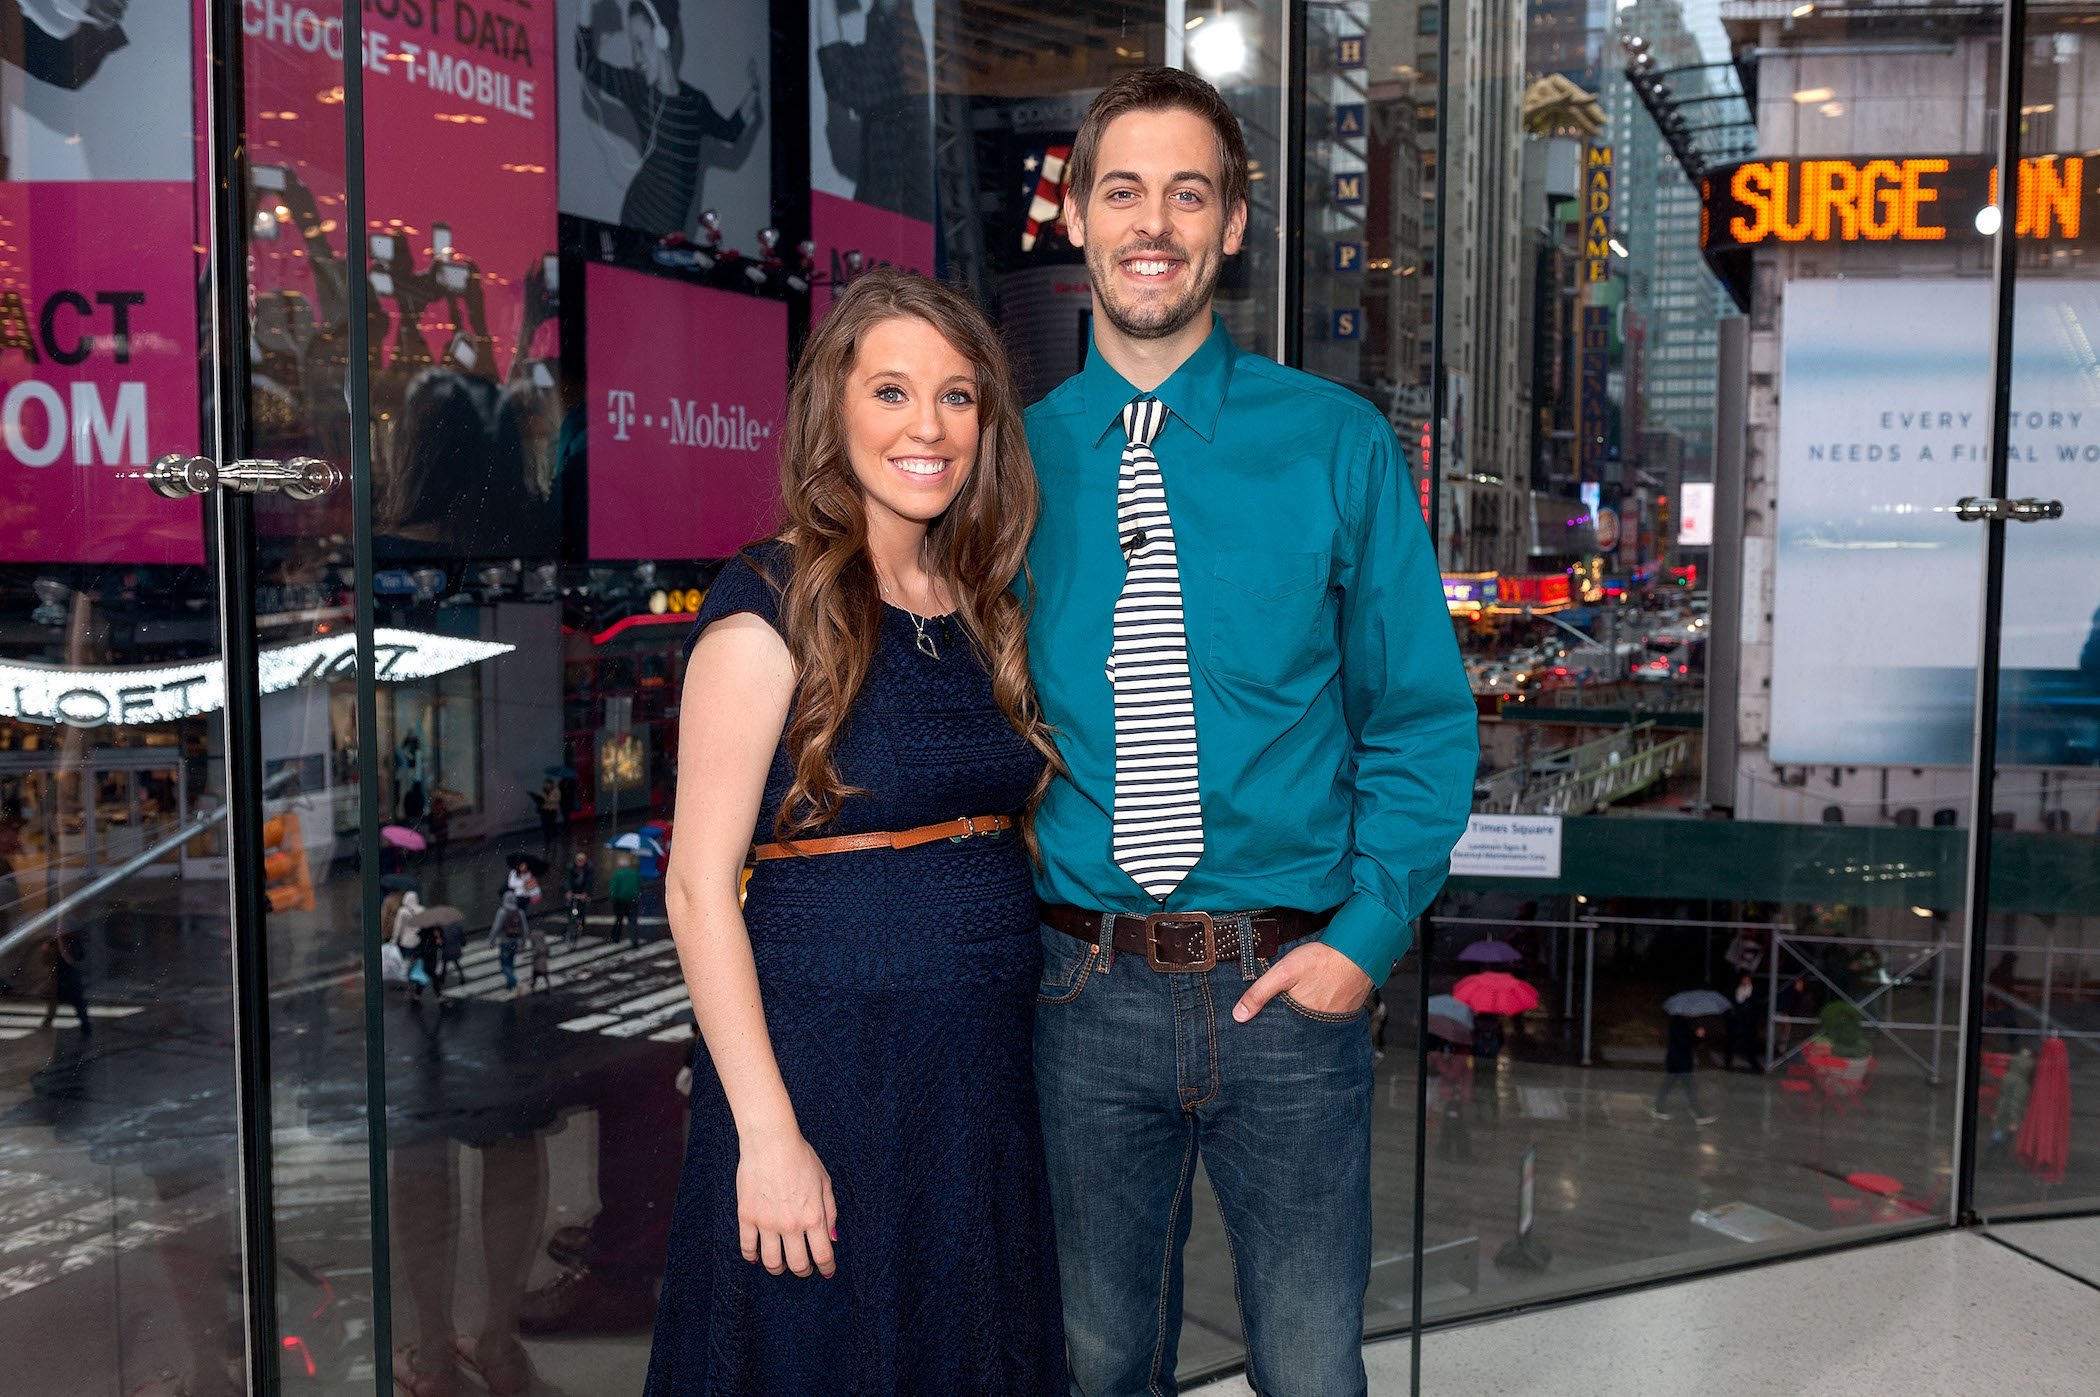 Jill Duggar of the Duggar family and Derick Dillard from TLC's 'Counting On' standing on the set of 'Extra' smiling at the camera